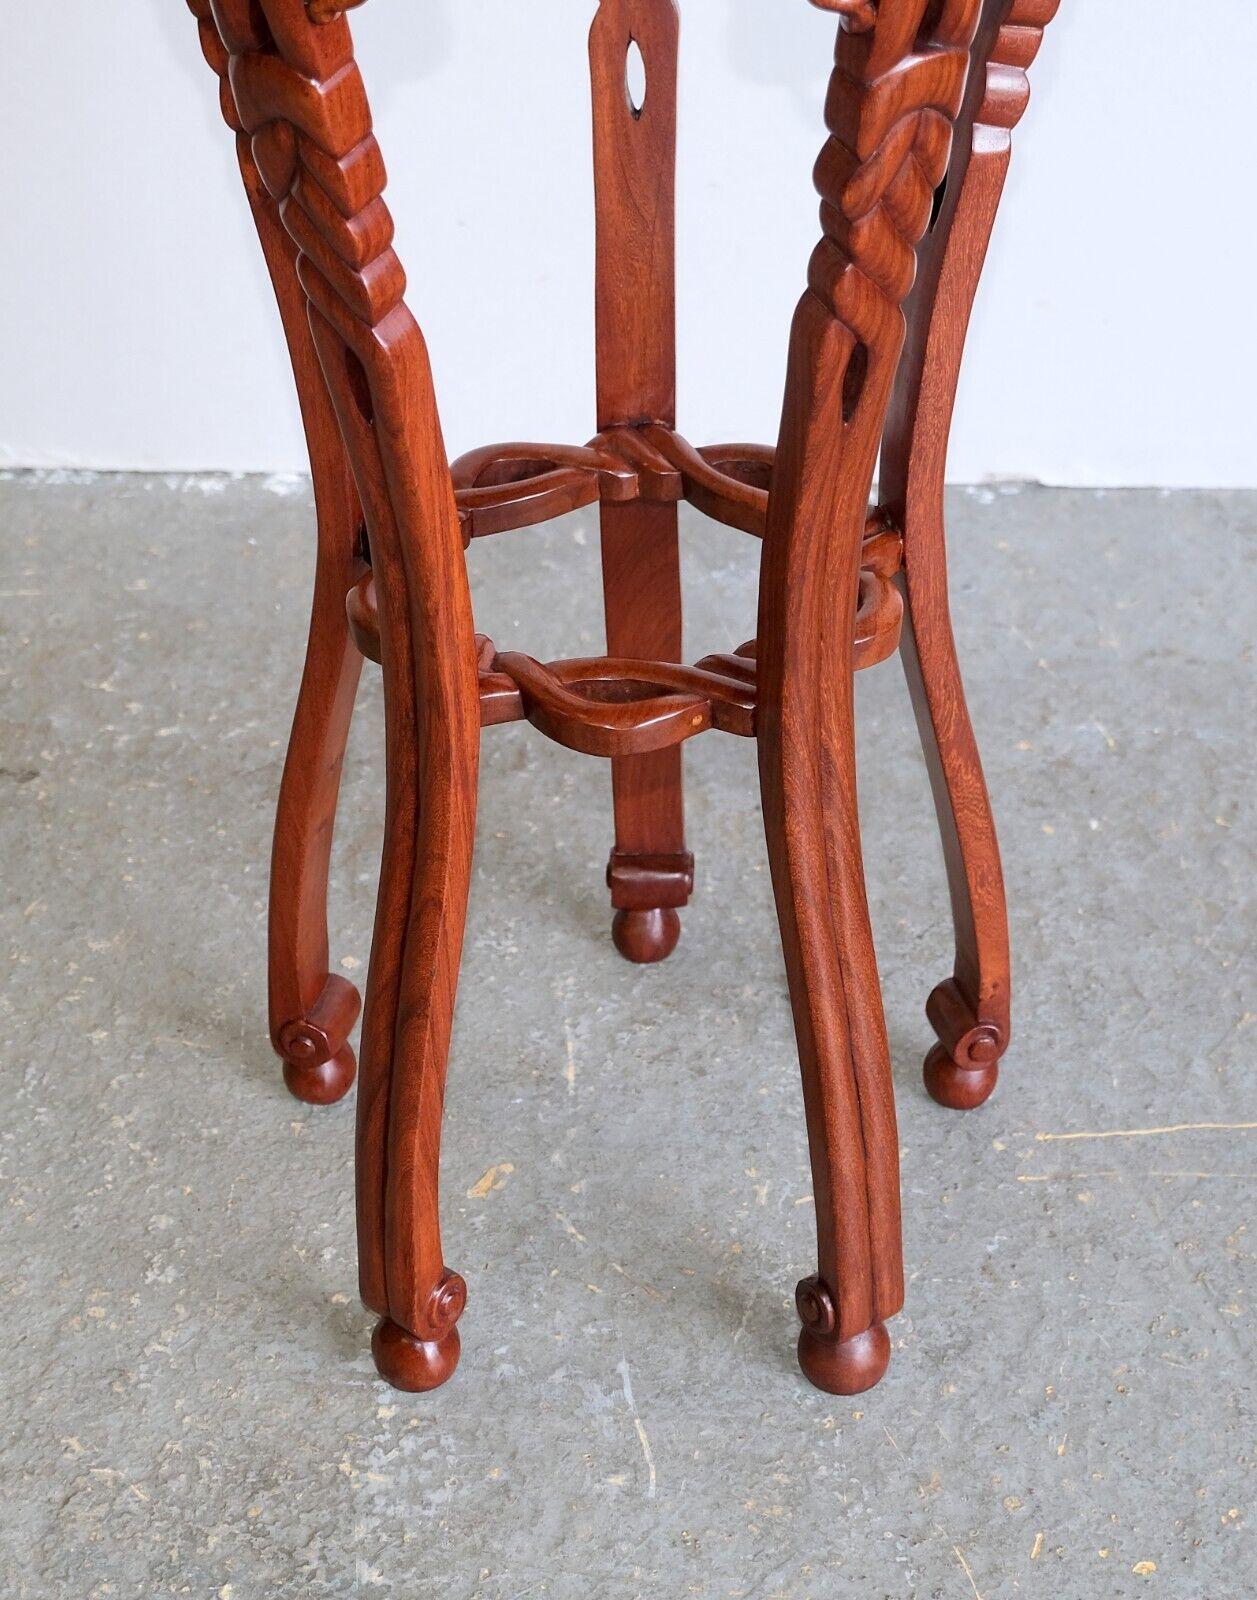 STUNNiNG HAND CARVED TEAK ROUND TOP PLANT STAND LEAVE TOP SHAPE & STUNNING LEGS For Sale 1